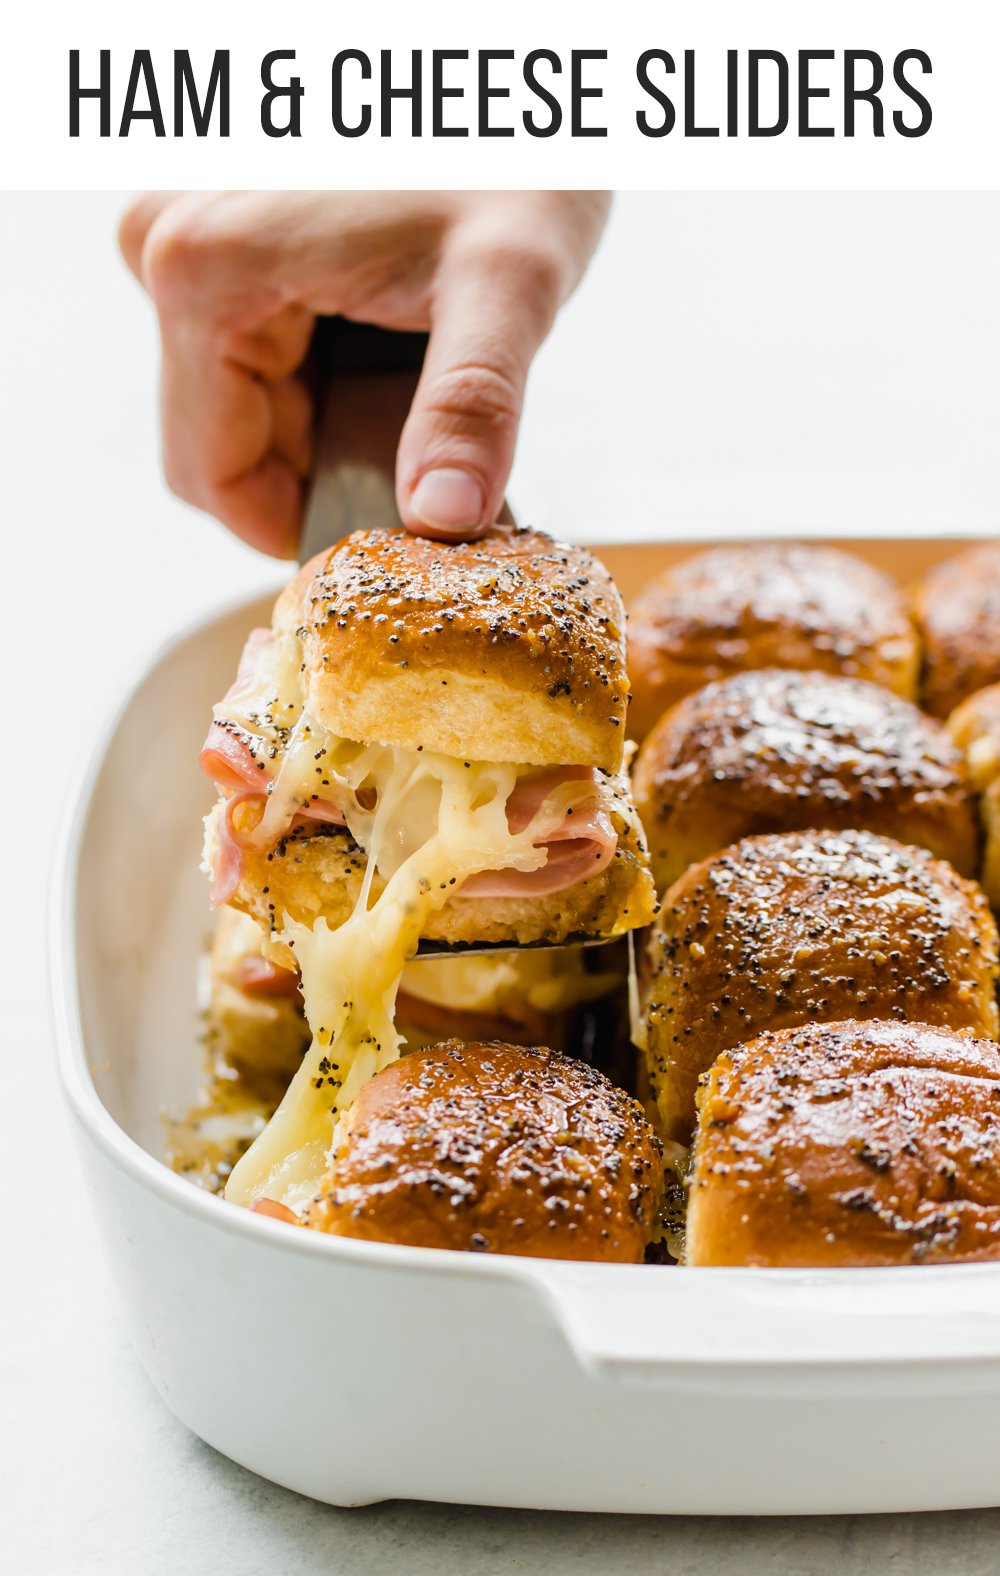 Hand lifting a ham & cheese slider from a white dish